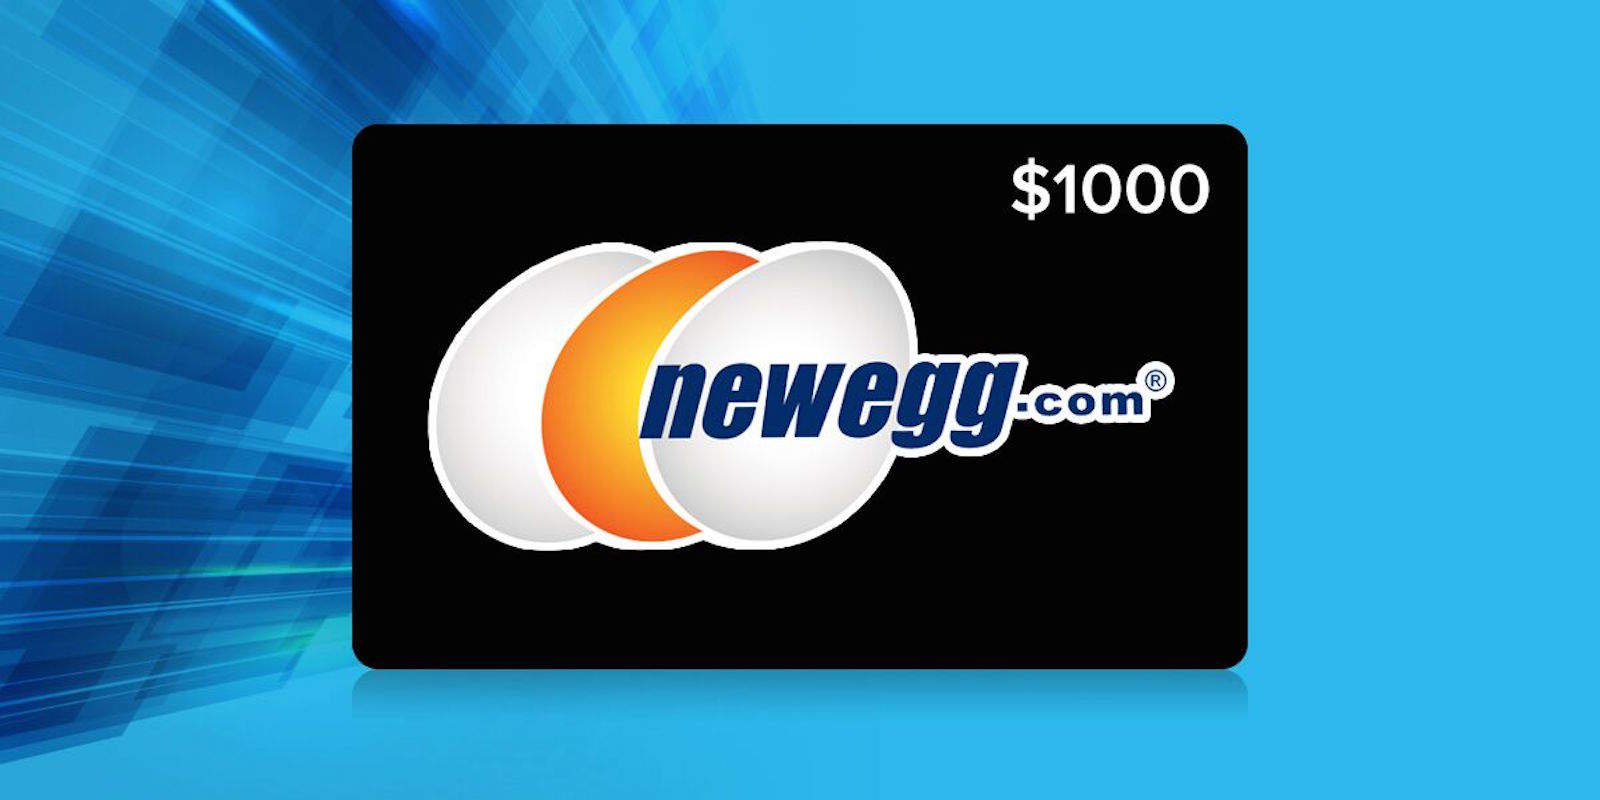 Newegg's $1,000 gift card giveaway is your last chance to build the machine of your dreams.